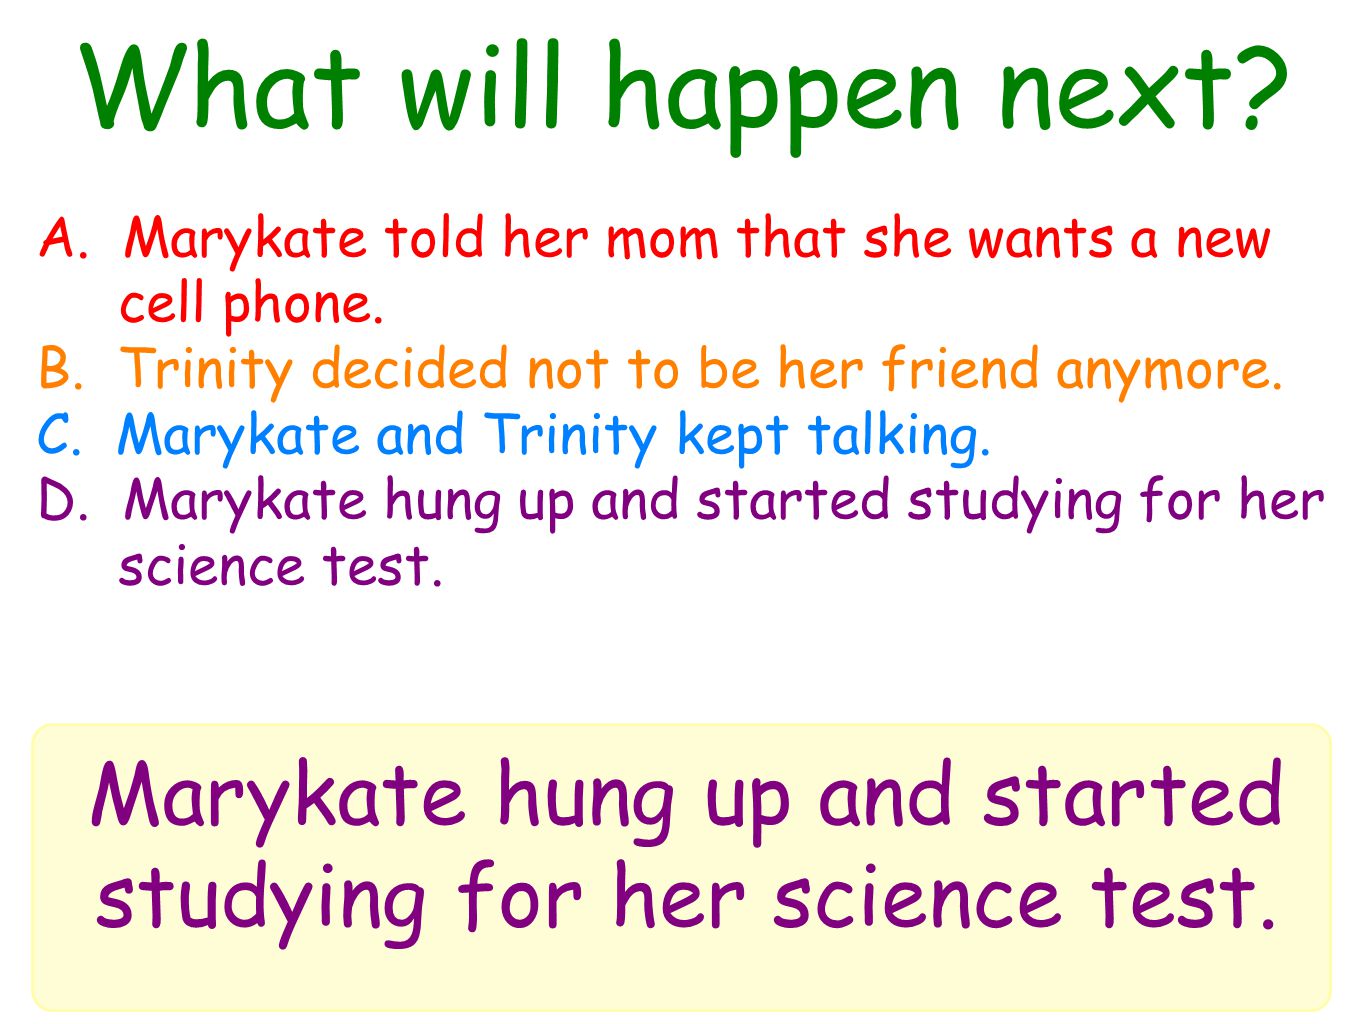 What will happen next. Marykate hung up and started studying for her science test.